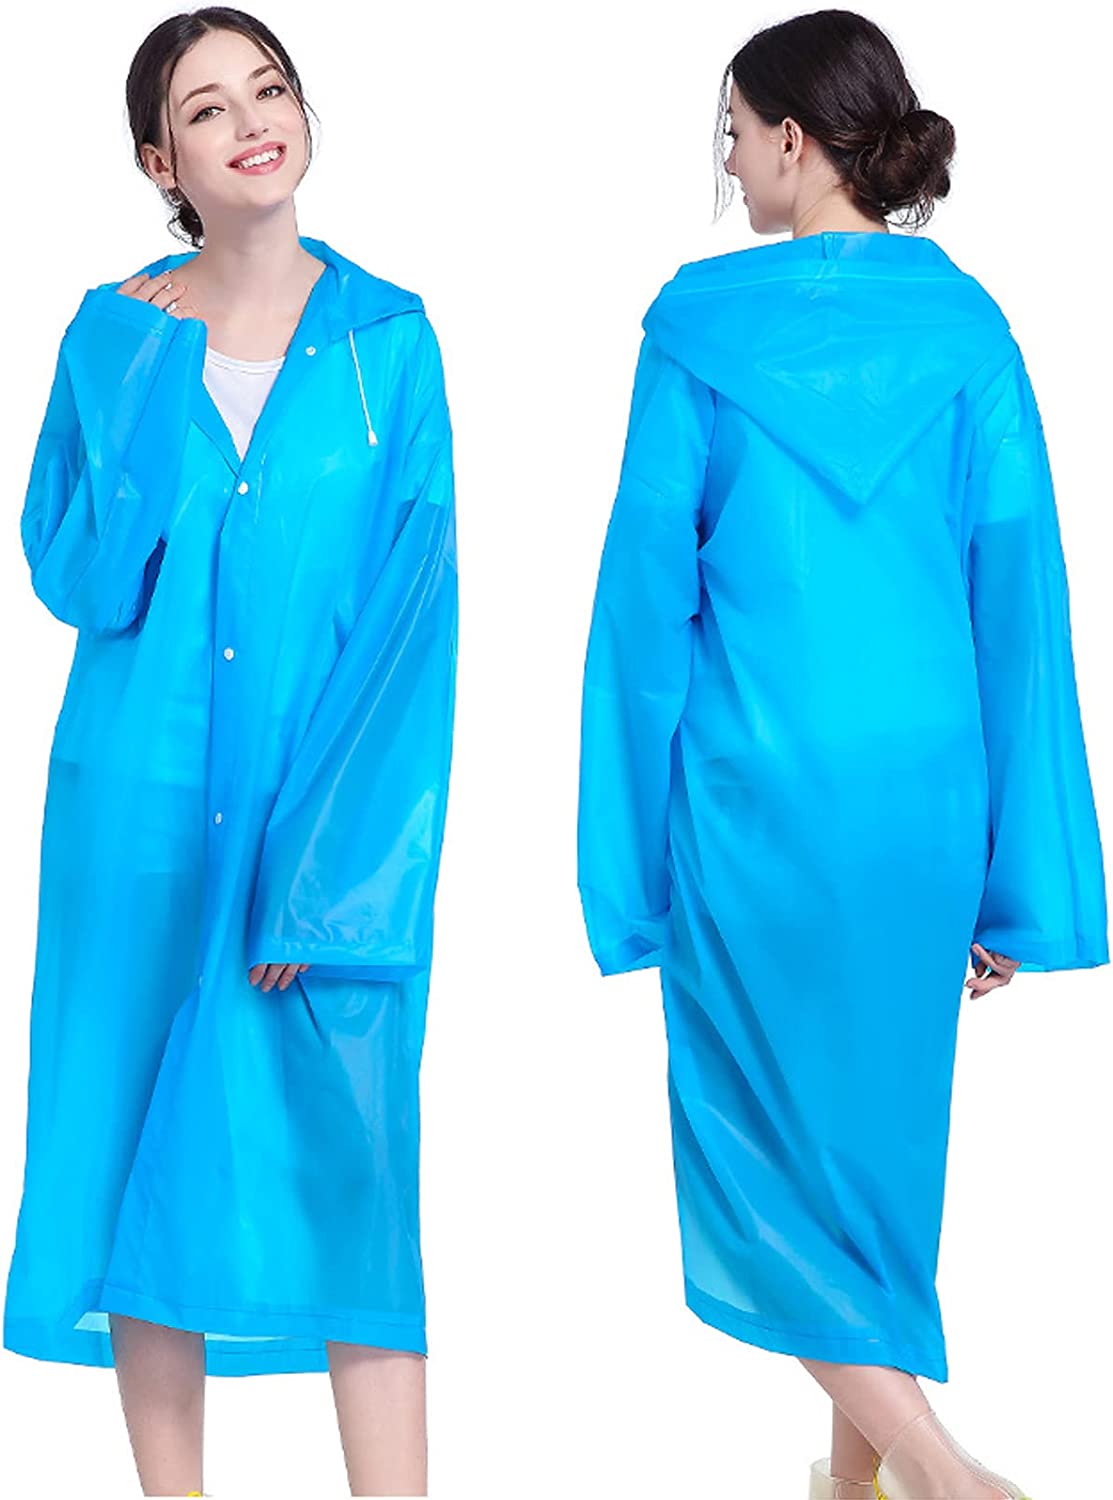 EVA Rain Ponchos for Adults/Kids, 2 Pack Reusable Raincoats with Hoods and Sleeves Lightweight Rain Jacket